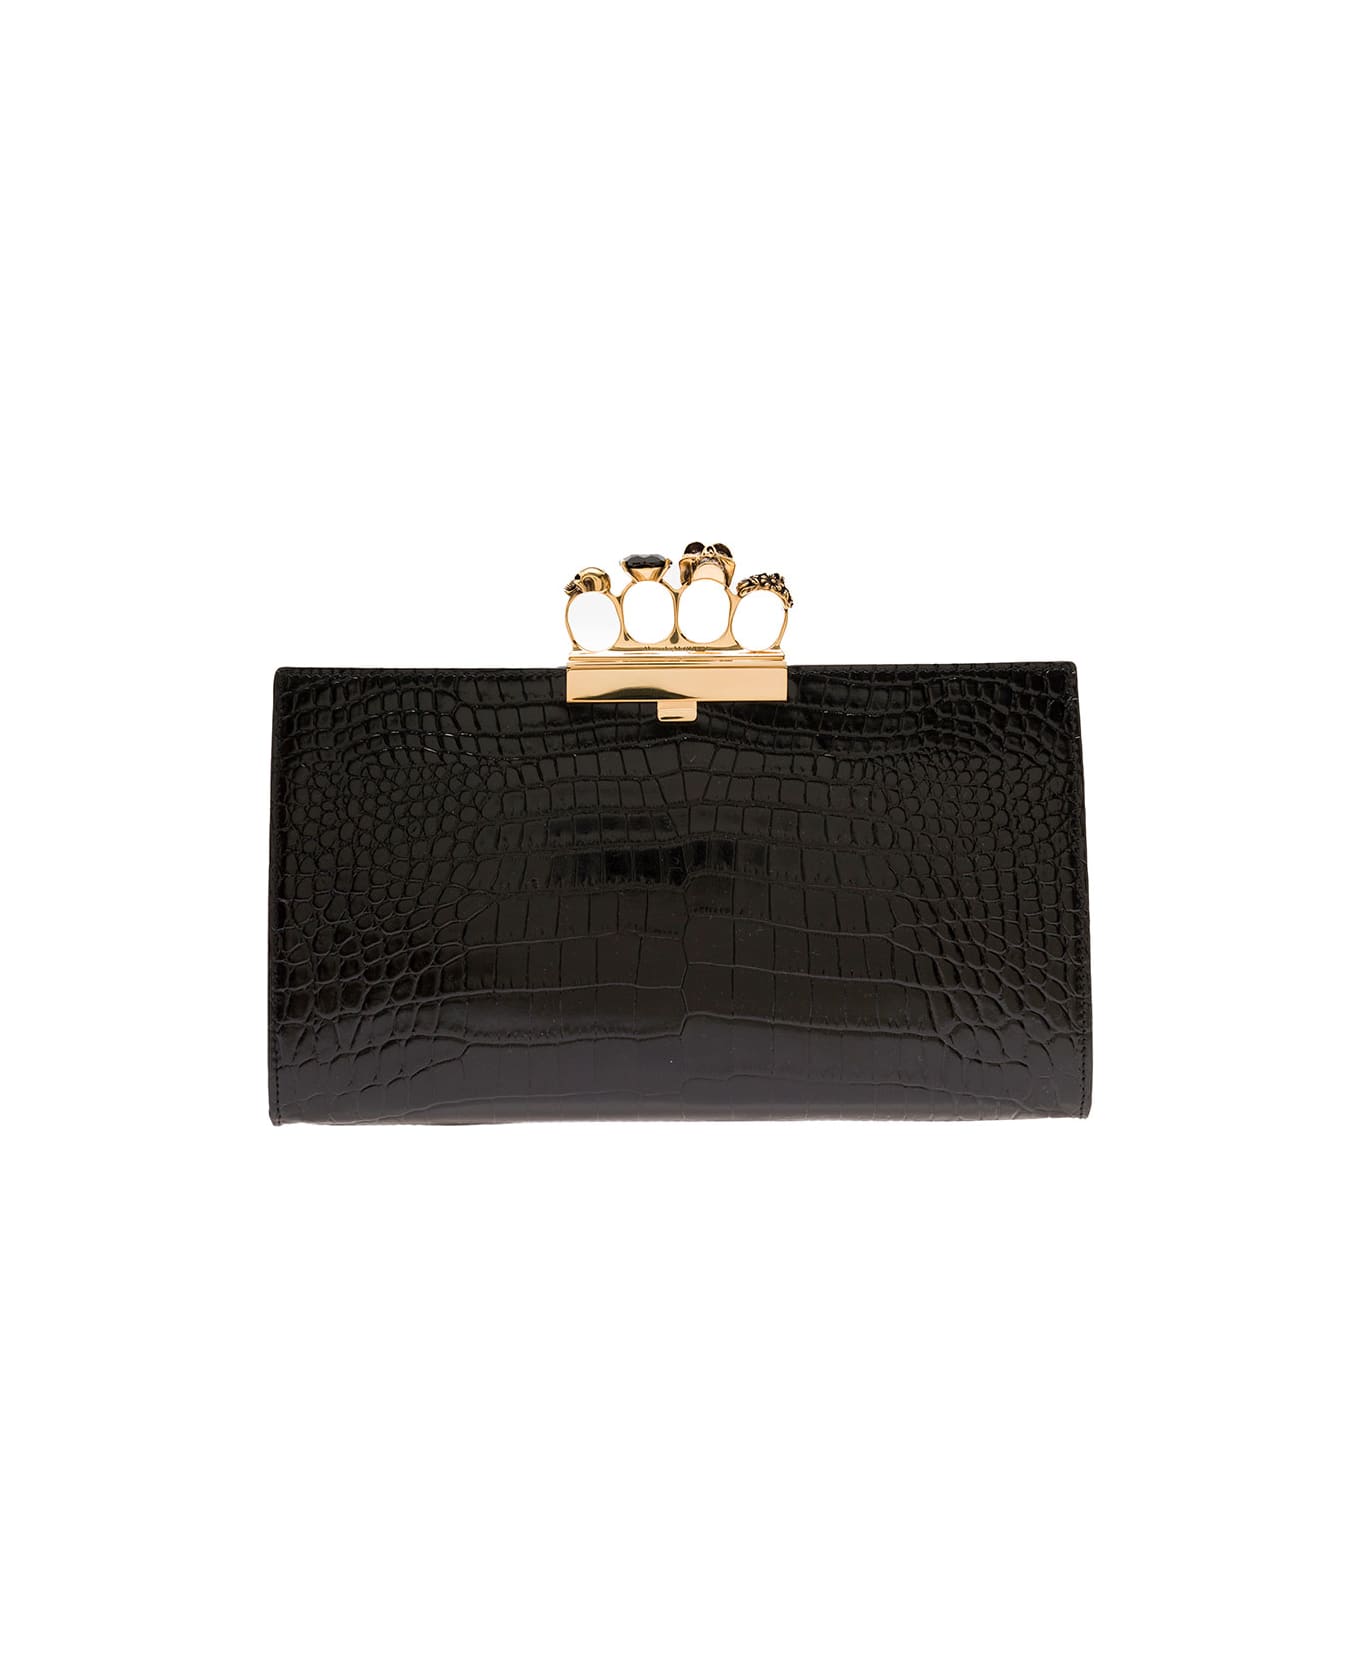 Alexander McQueen Black Crocodile Printed Leather Pouch With Fuor Ring Detail Alexander Mcqueen Woman - Black